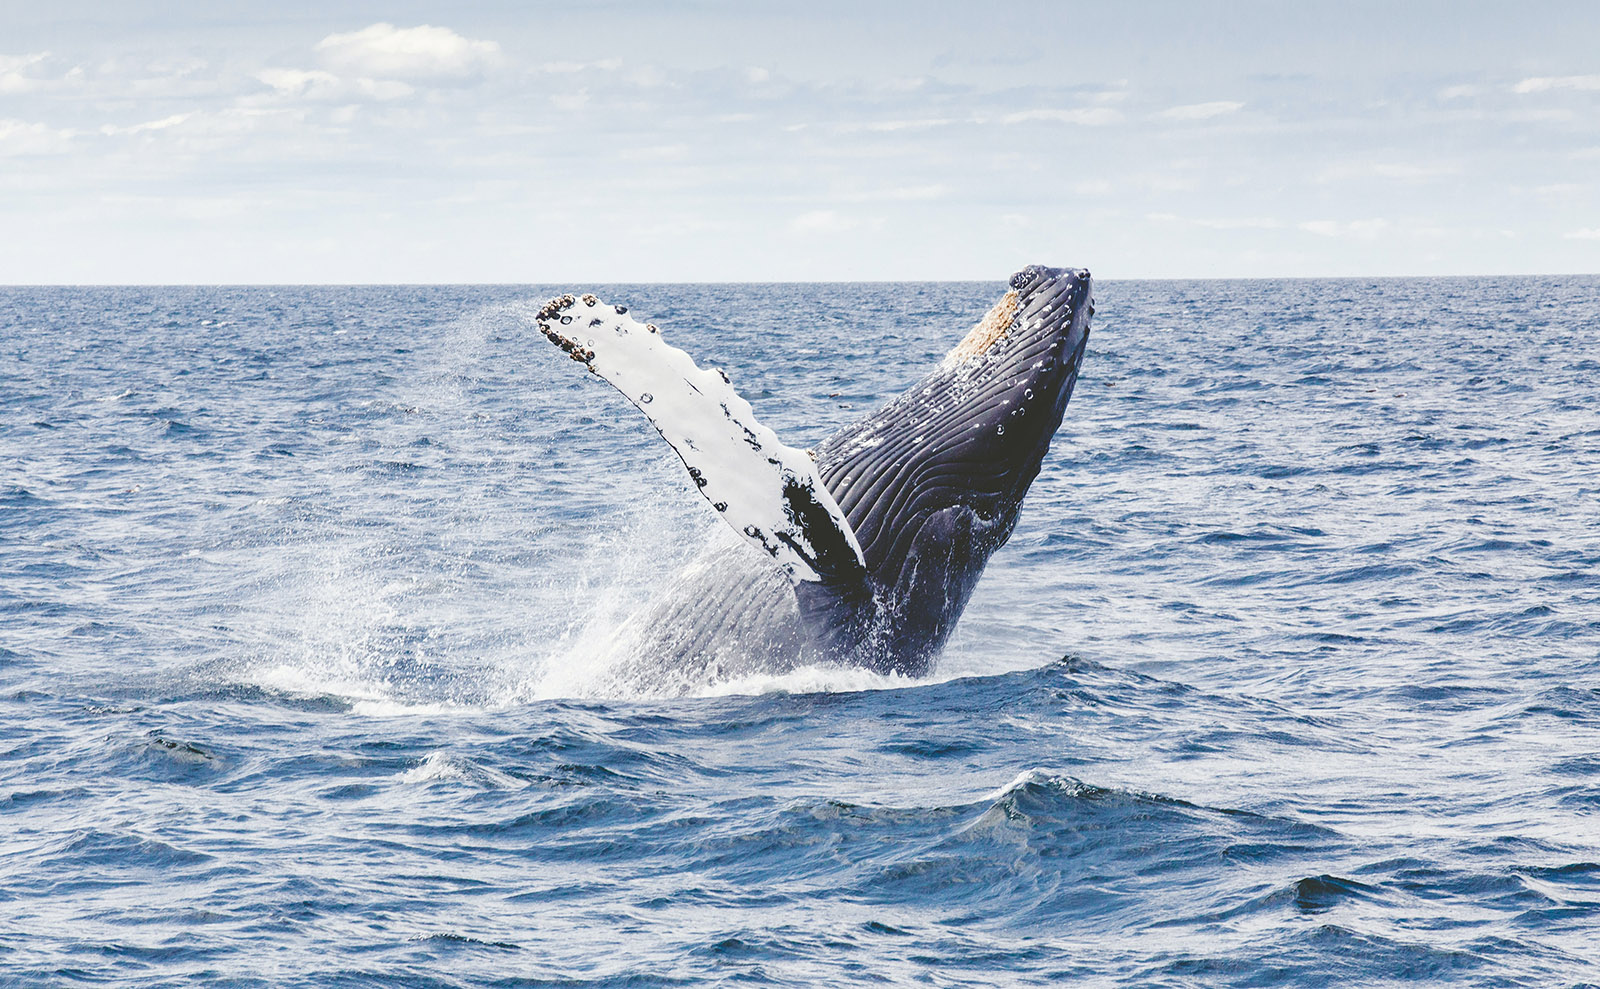 humpback whale jumping in the ocean under a blue sky